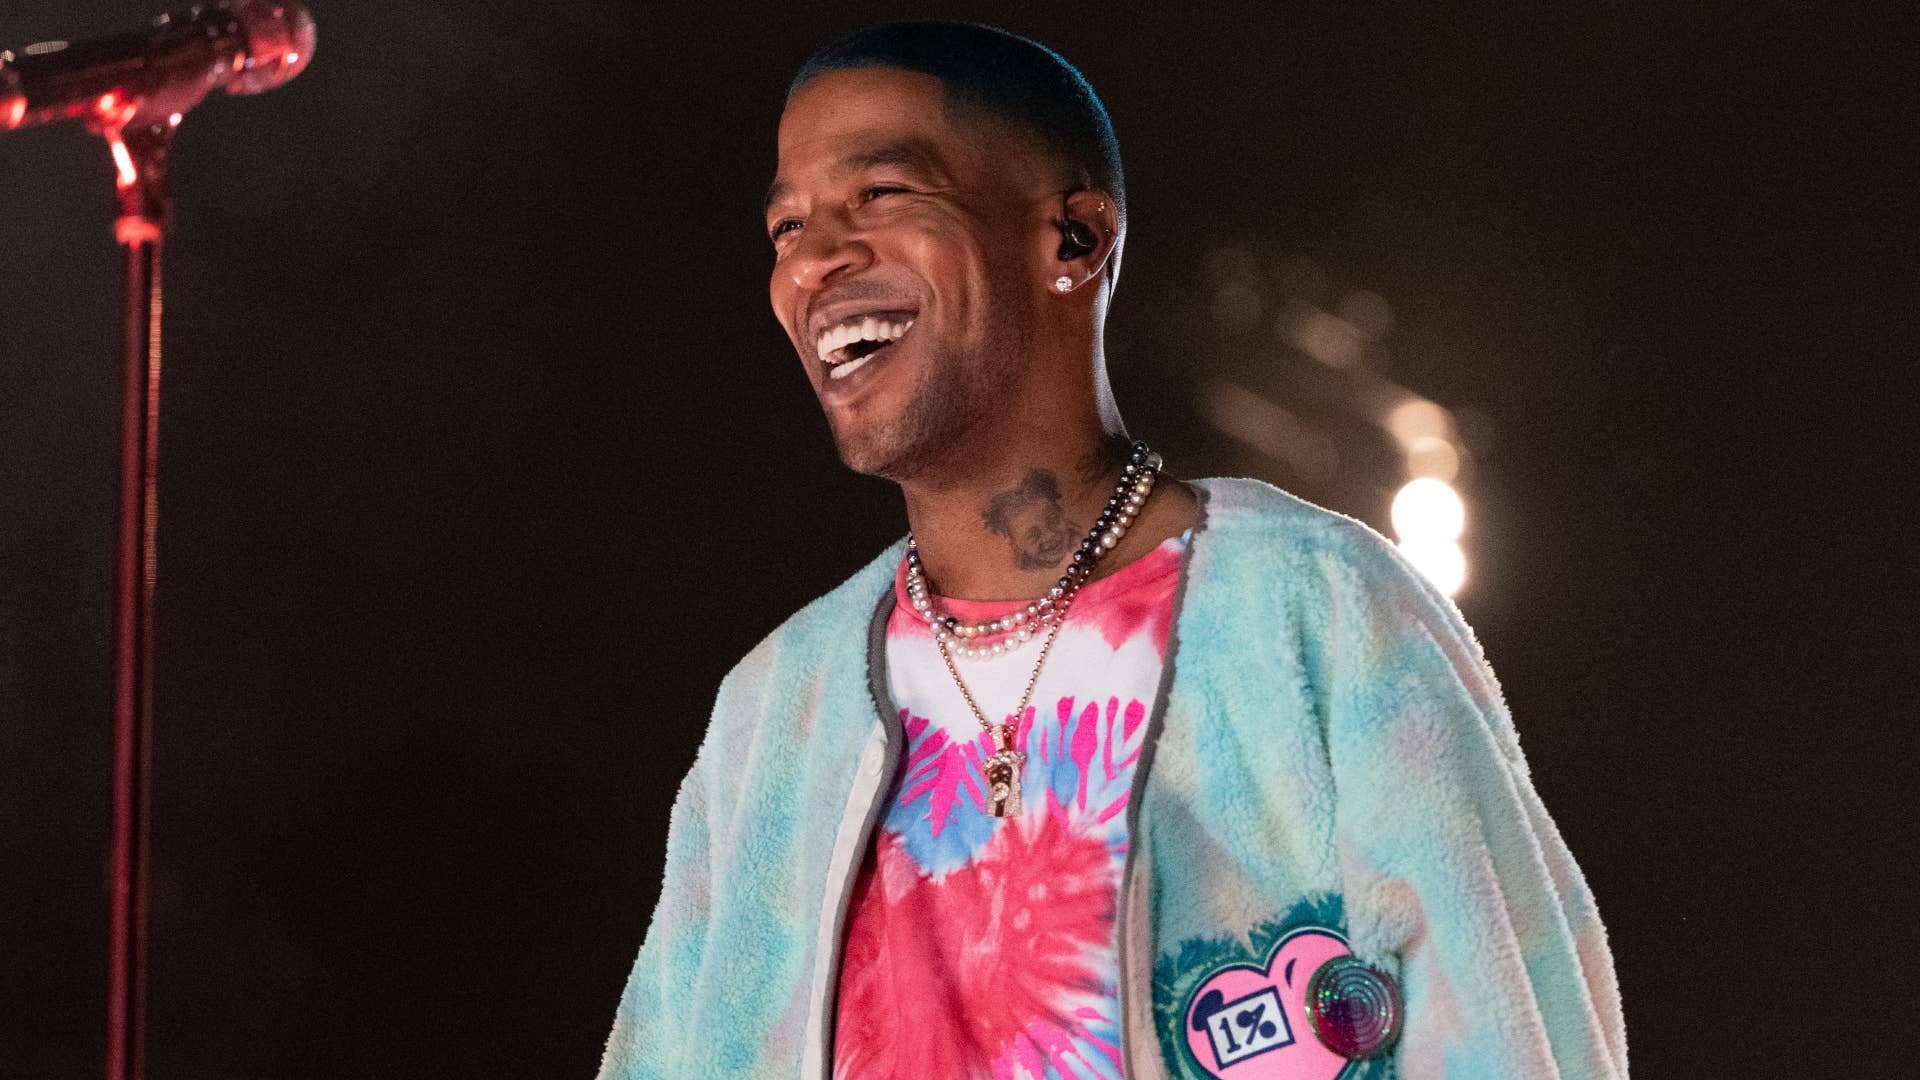 Kid Cudi is pictured smiling during a live show